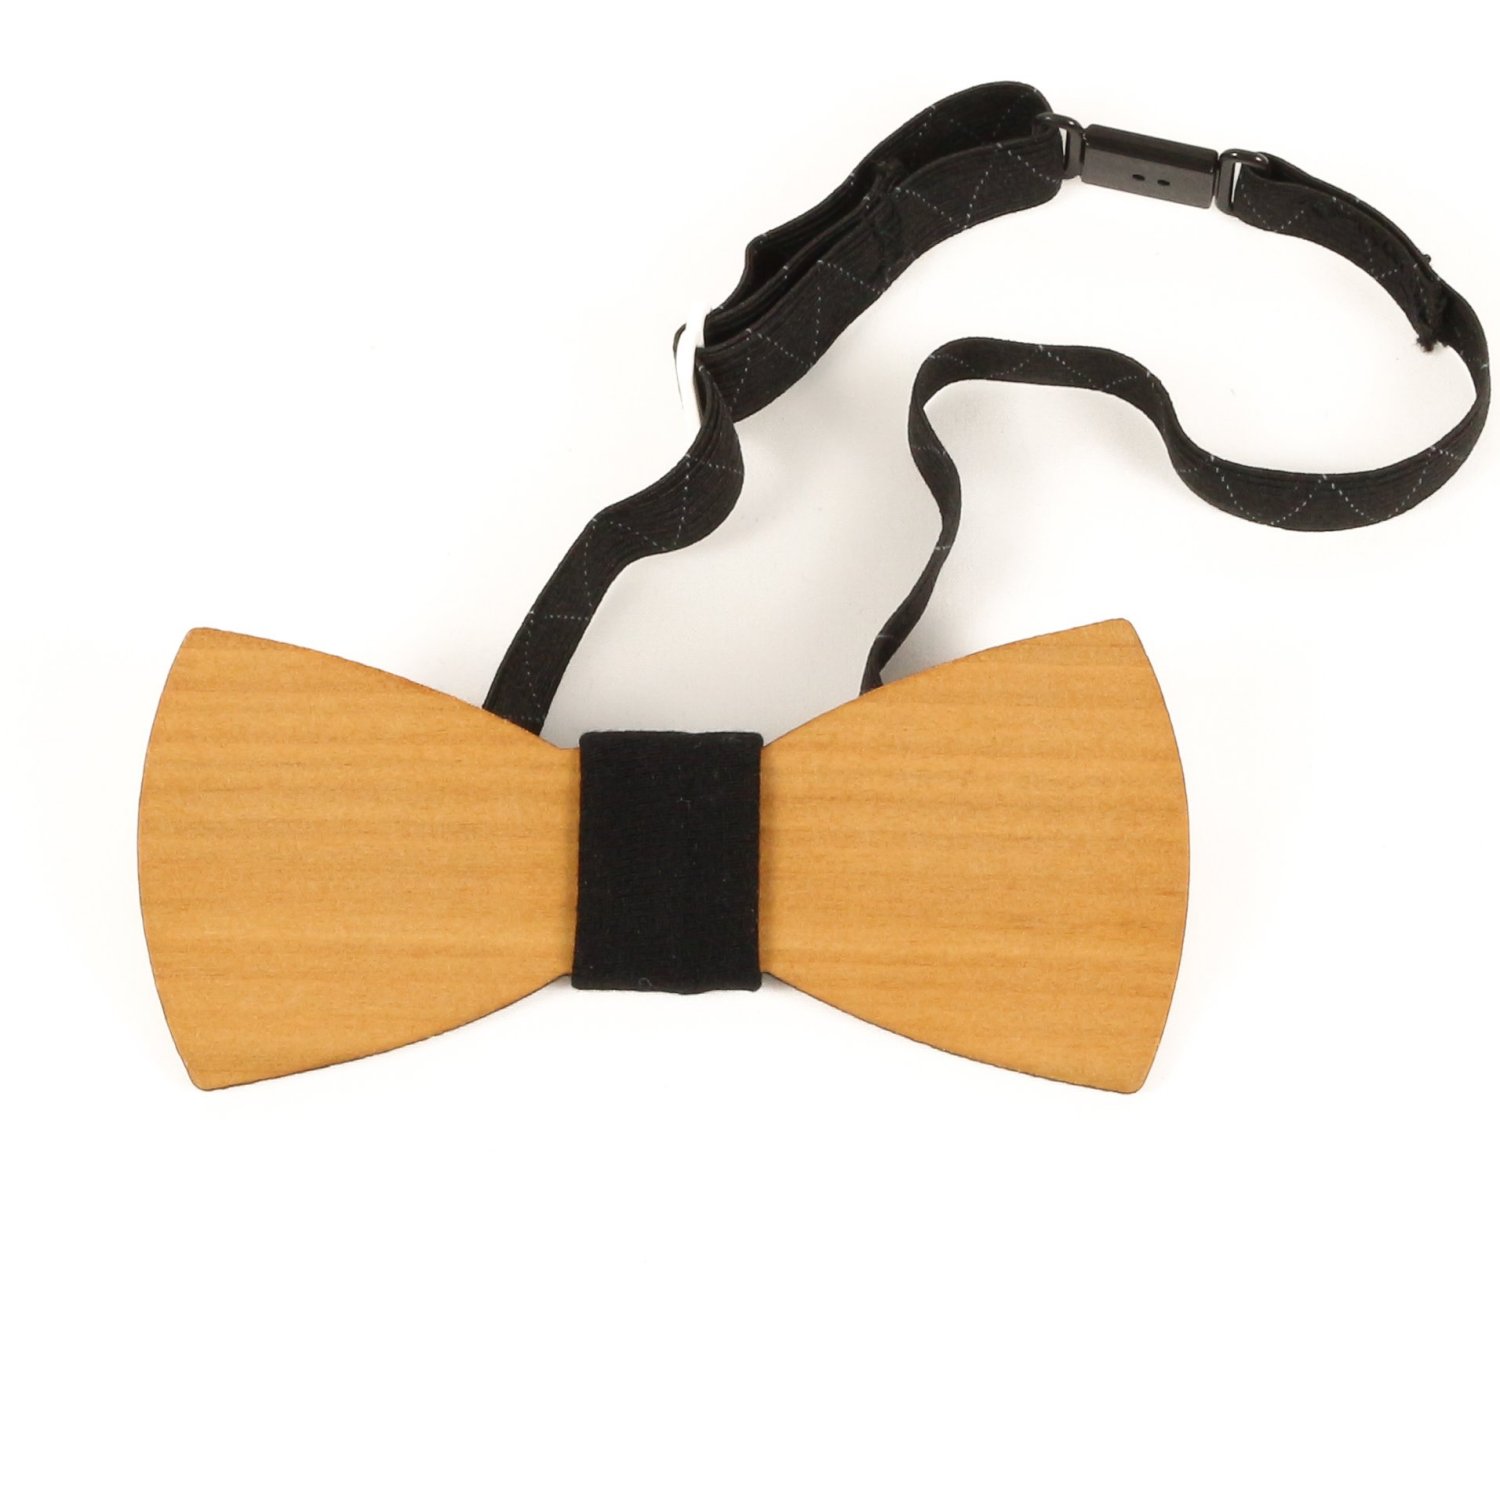 classy wooden bow tie made of cherry wood